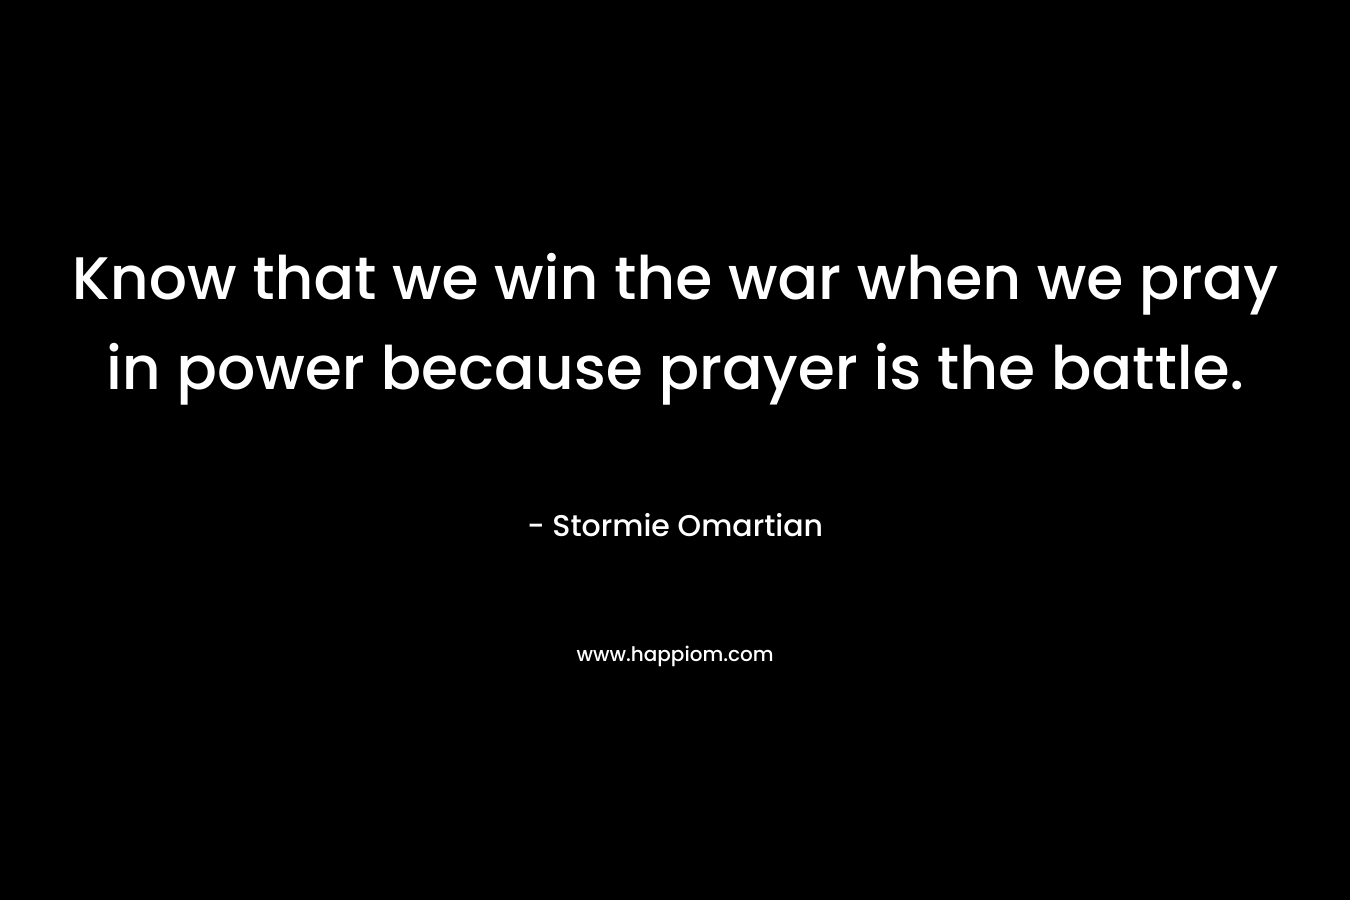 Know that we win the war when we pray in power because prayer is the battle.